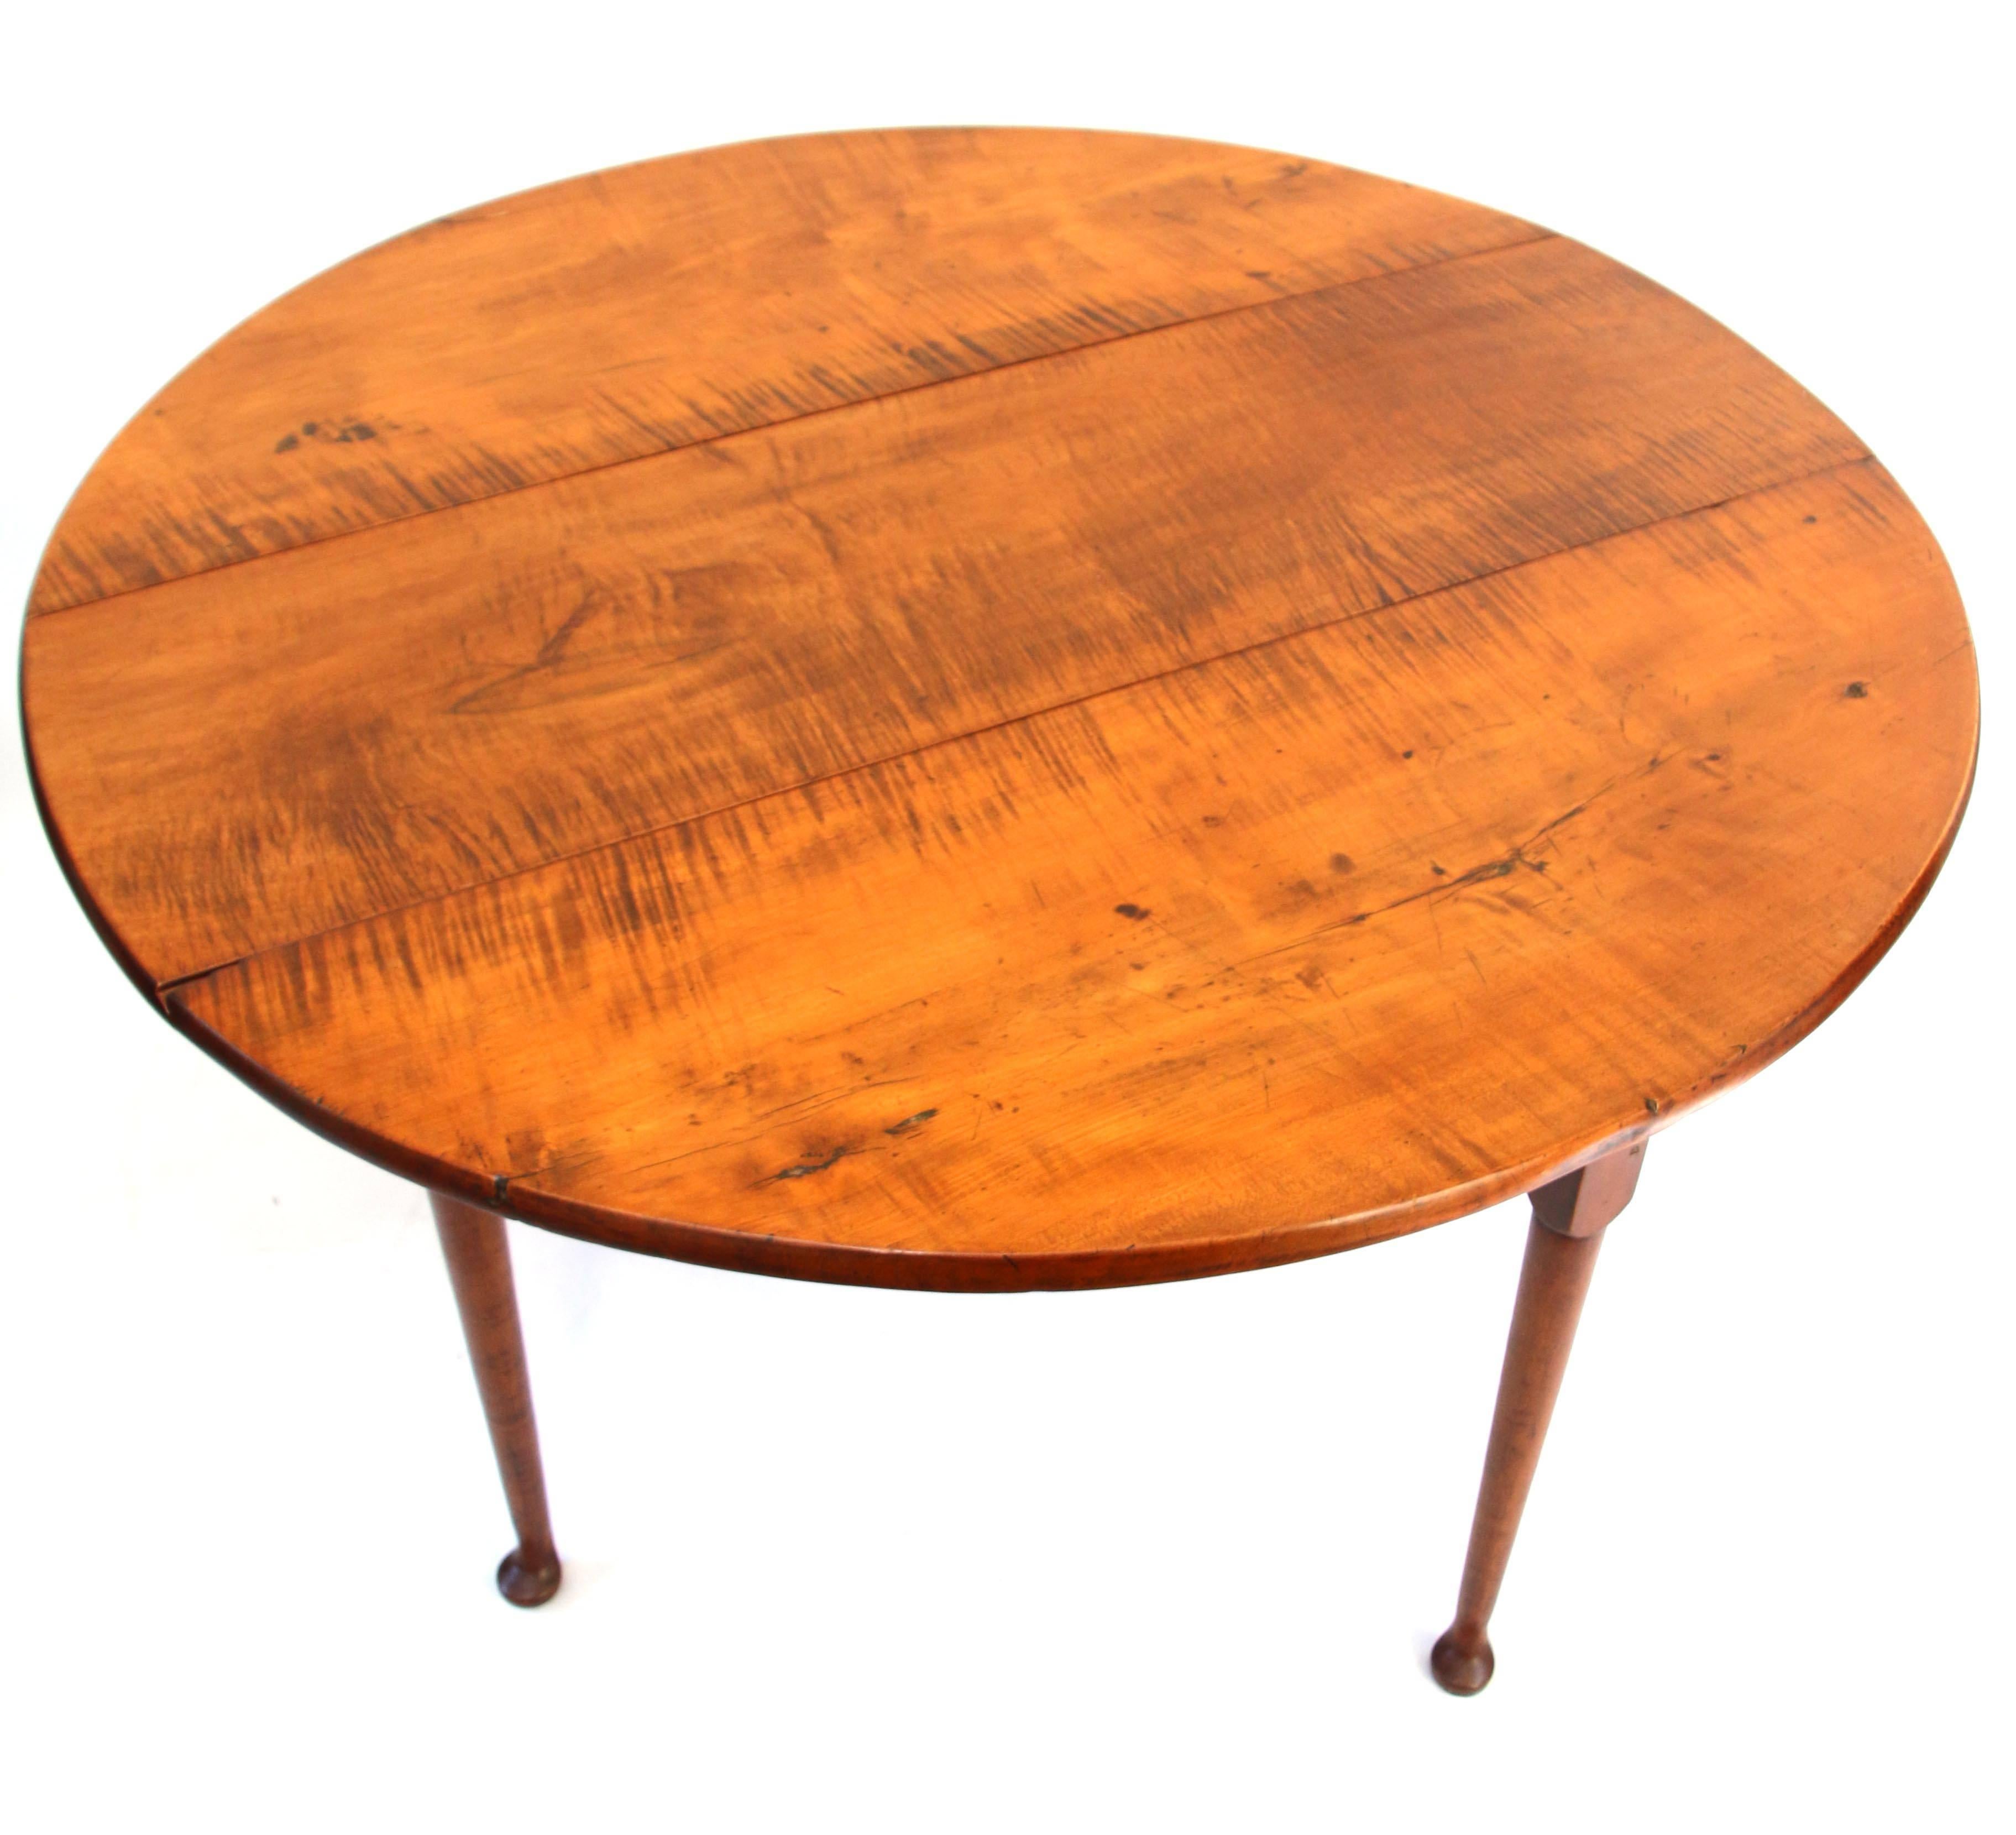 Queen Anne tiger maple drop-leaf table, the circular top above a straight skirt joining tapering legs ending in pad feet. Original hinges on leaves as well as original wooden hinges and dowels in swinging legs. Minor loss at edge of one leaf as